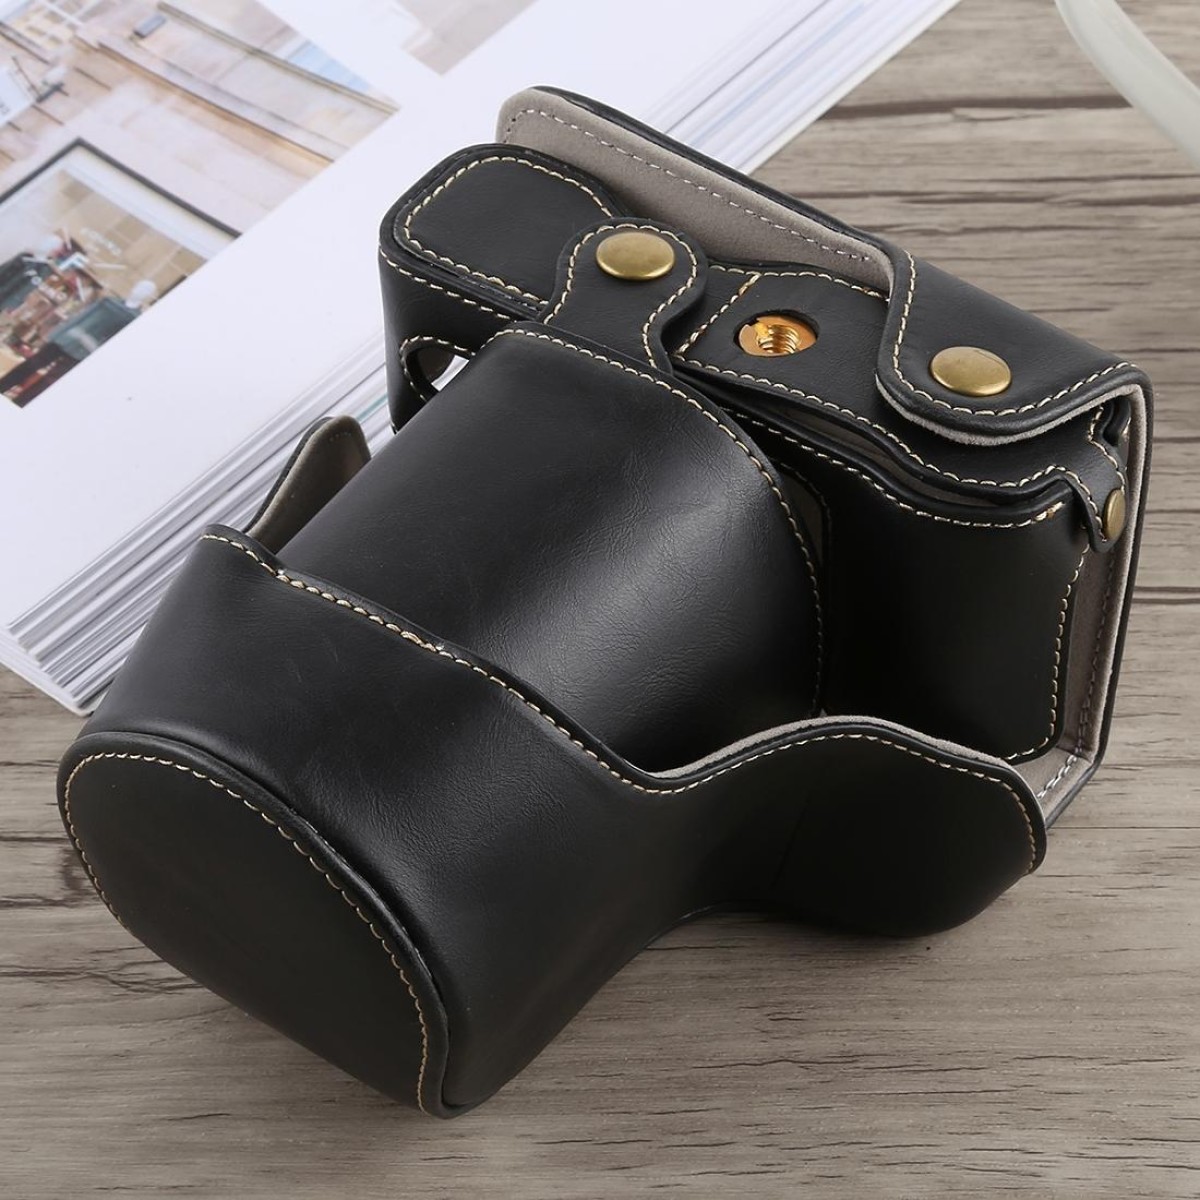 Full Body Camera PU Leather Case Bag with Strap for Fujifilm X-A5 (Black)